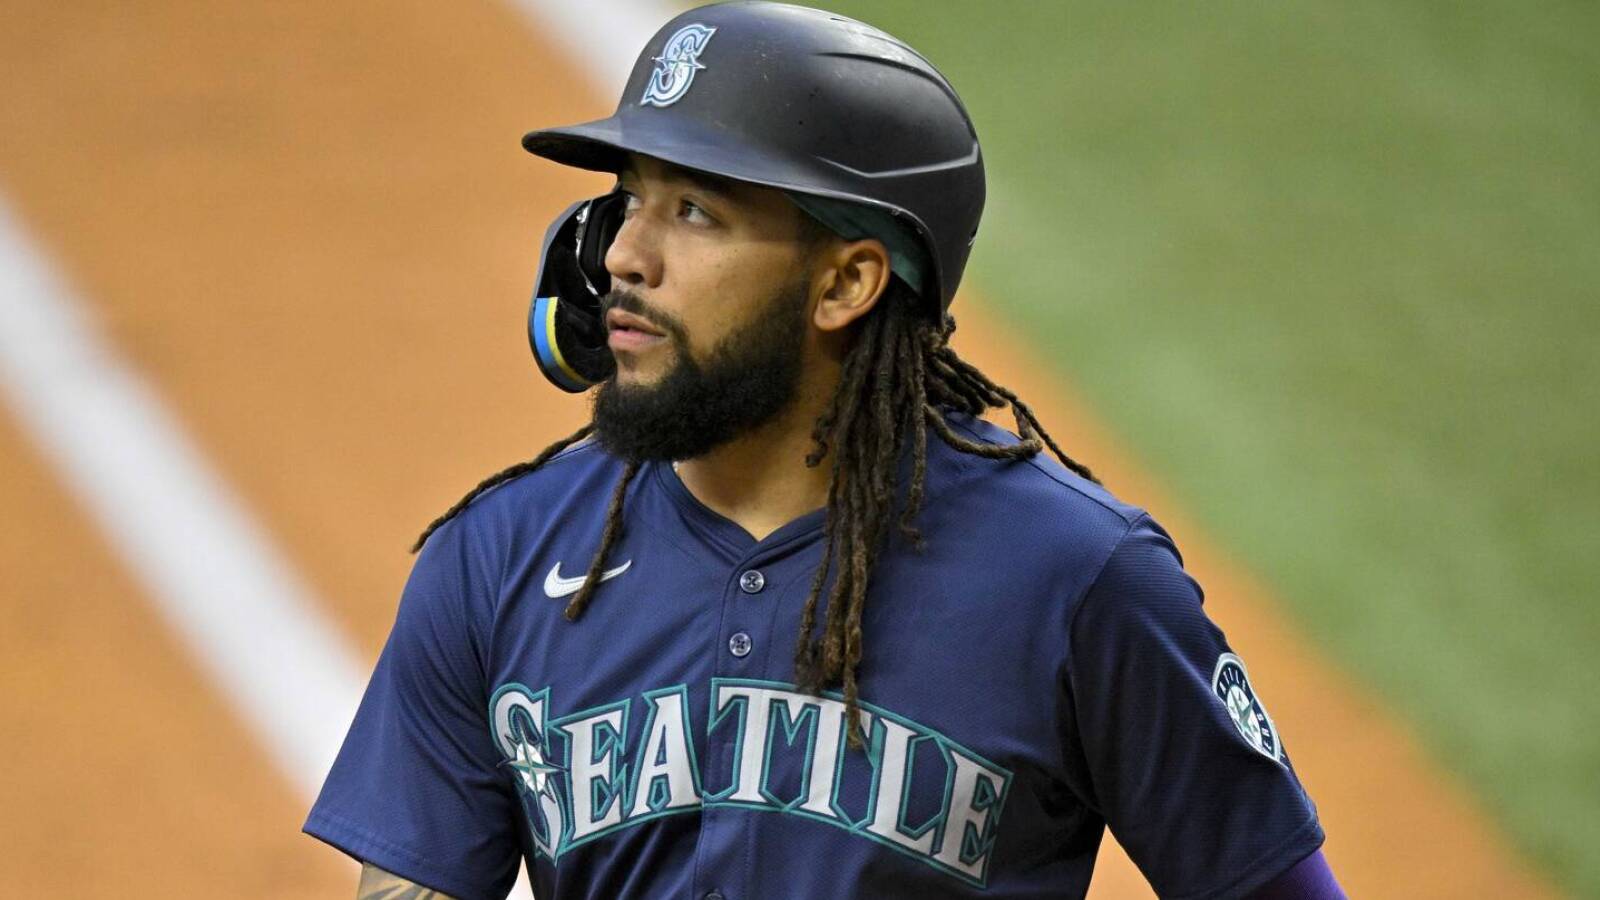 Mariners GM has injury updates on Gold Glove-winning SS, others